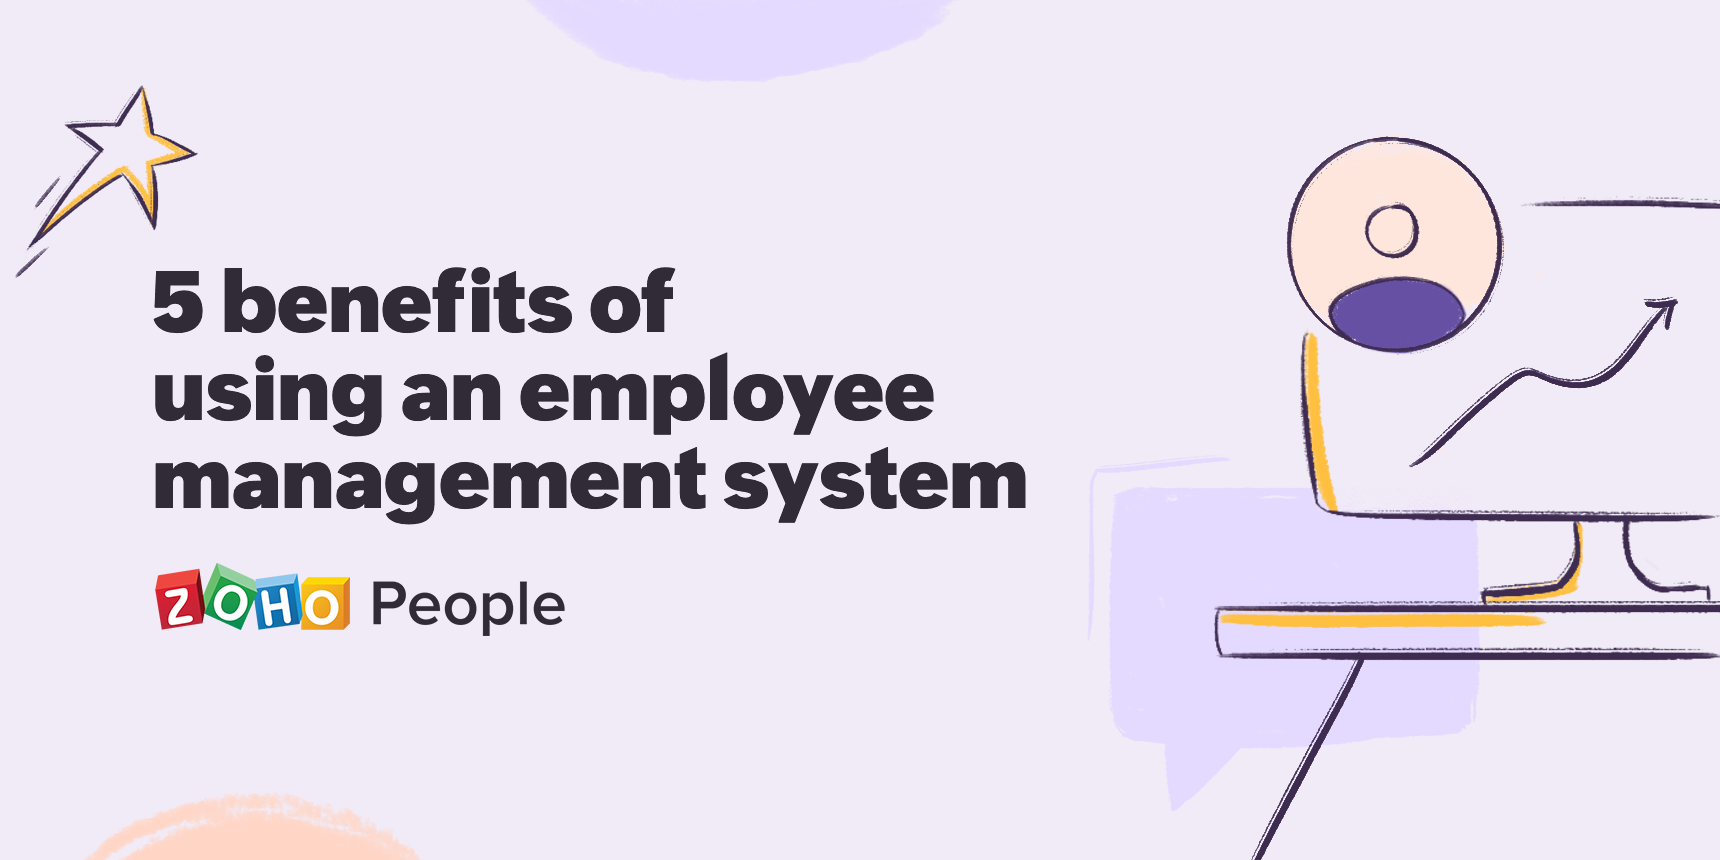 Top 5 reasons why every organization should use an employee management system